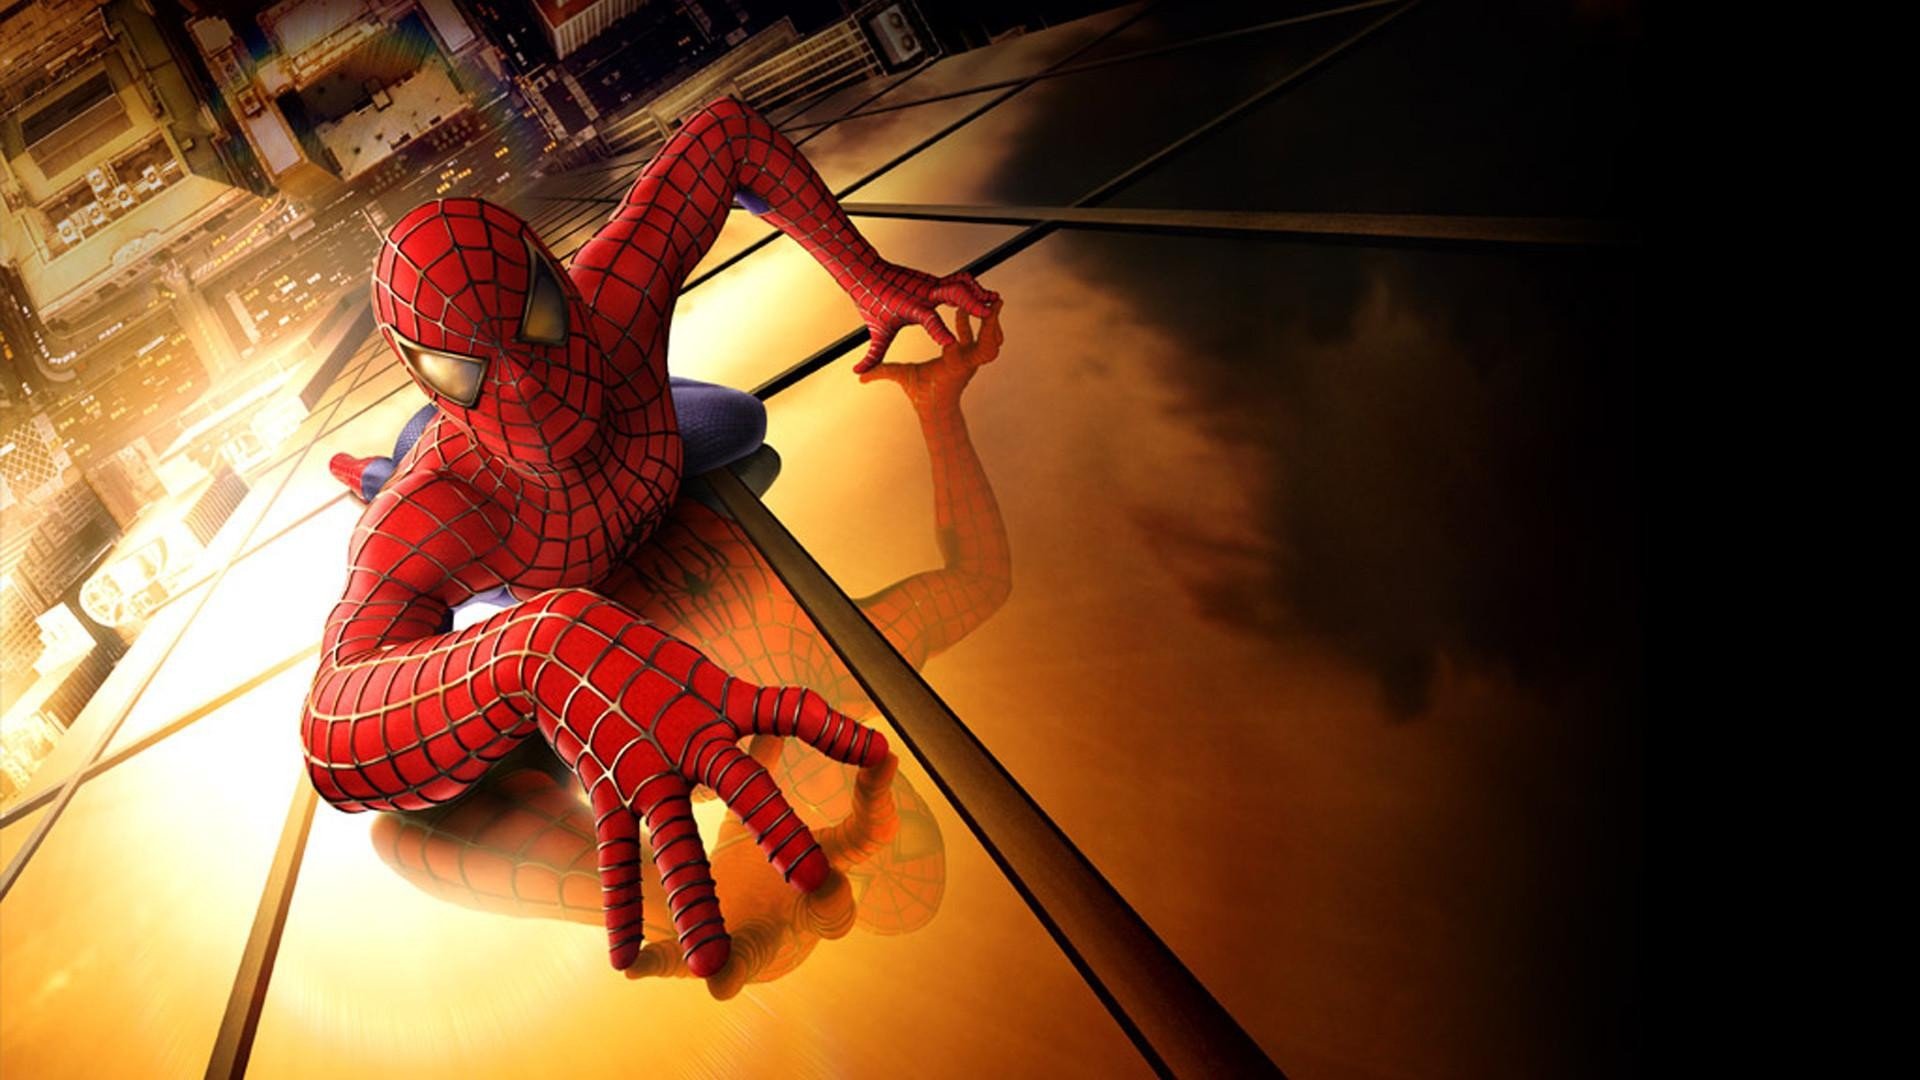 Download hd wallpapers of 316175-movies, Spider-man, Superheroes, Marvel, C...